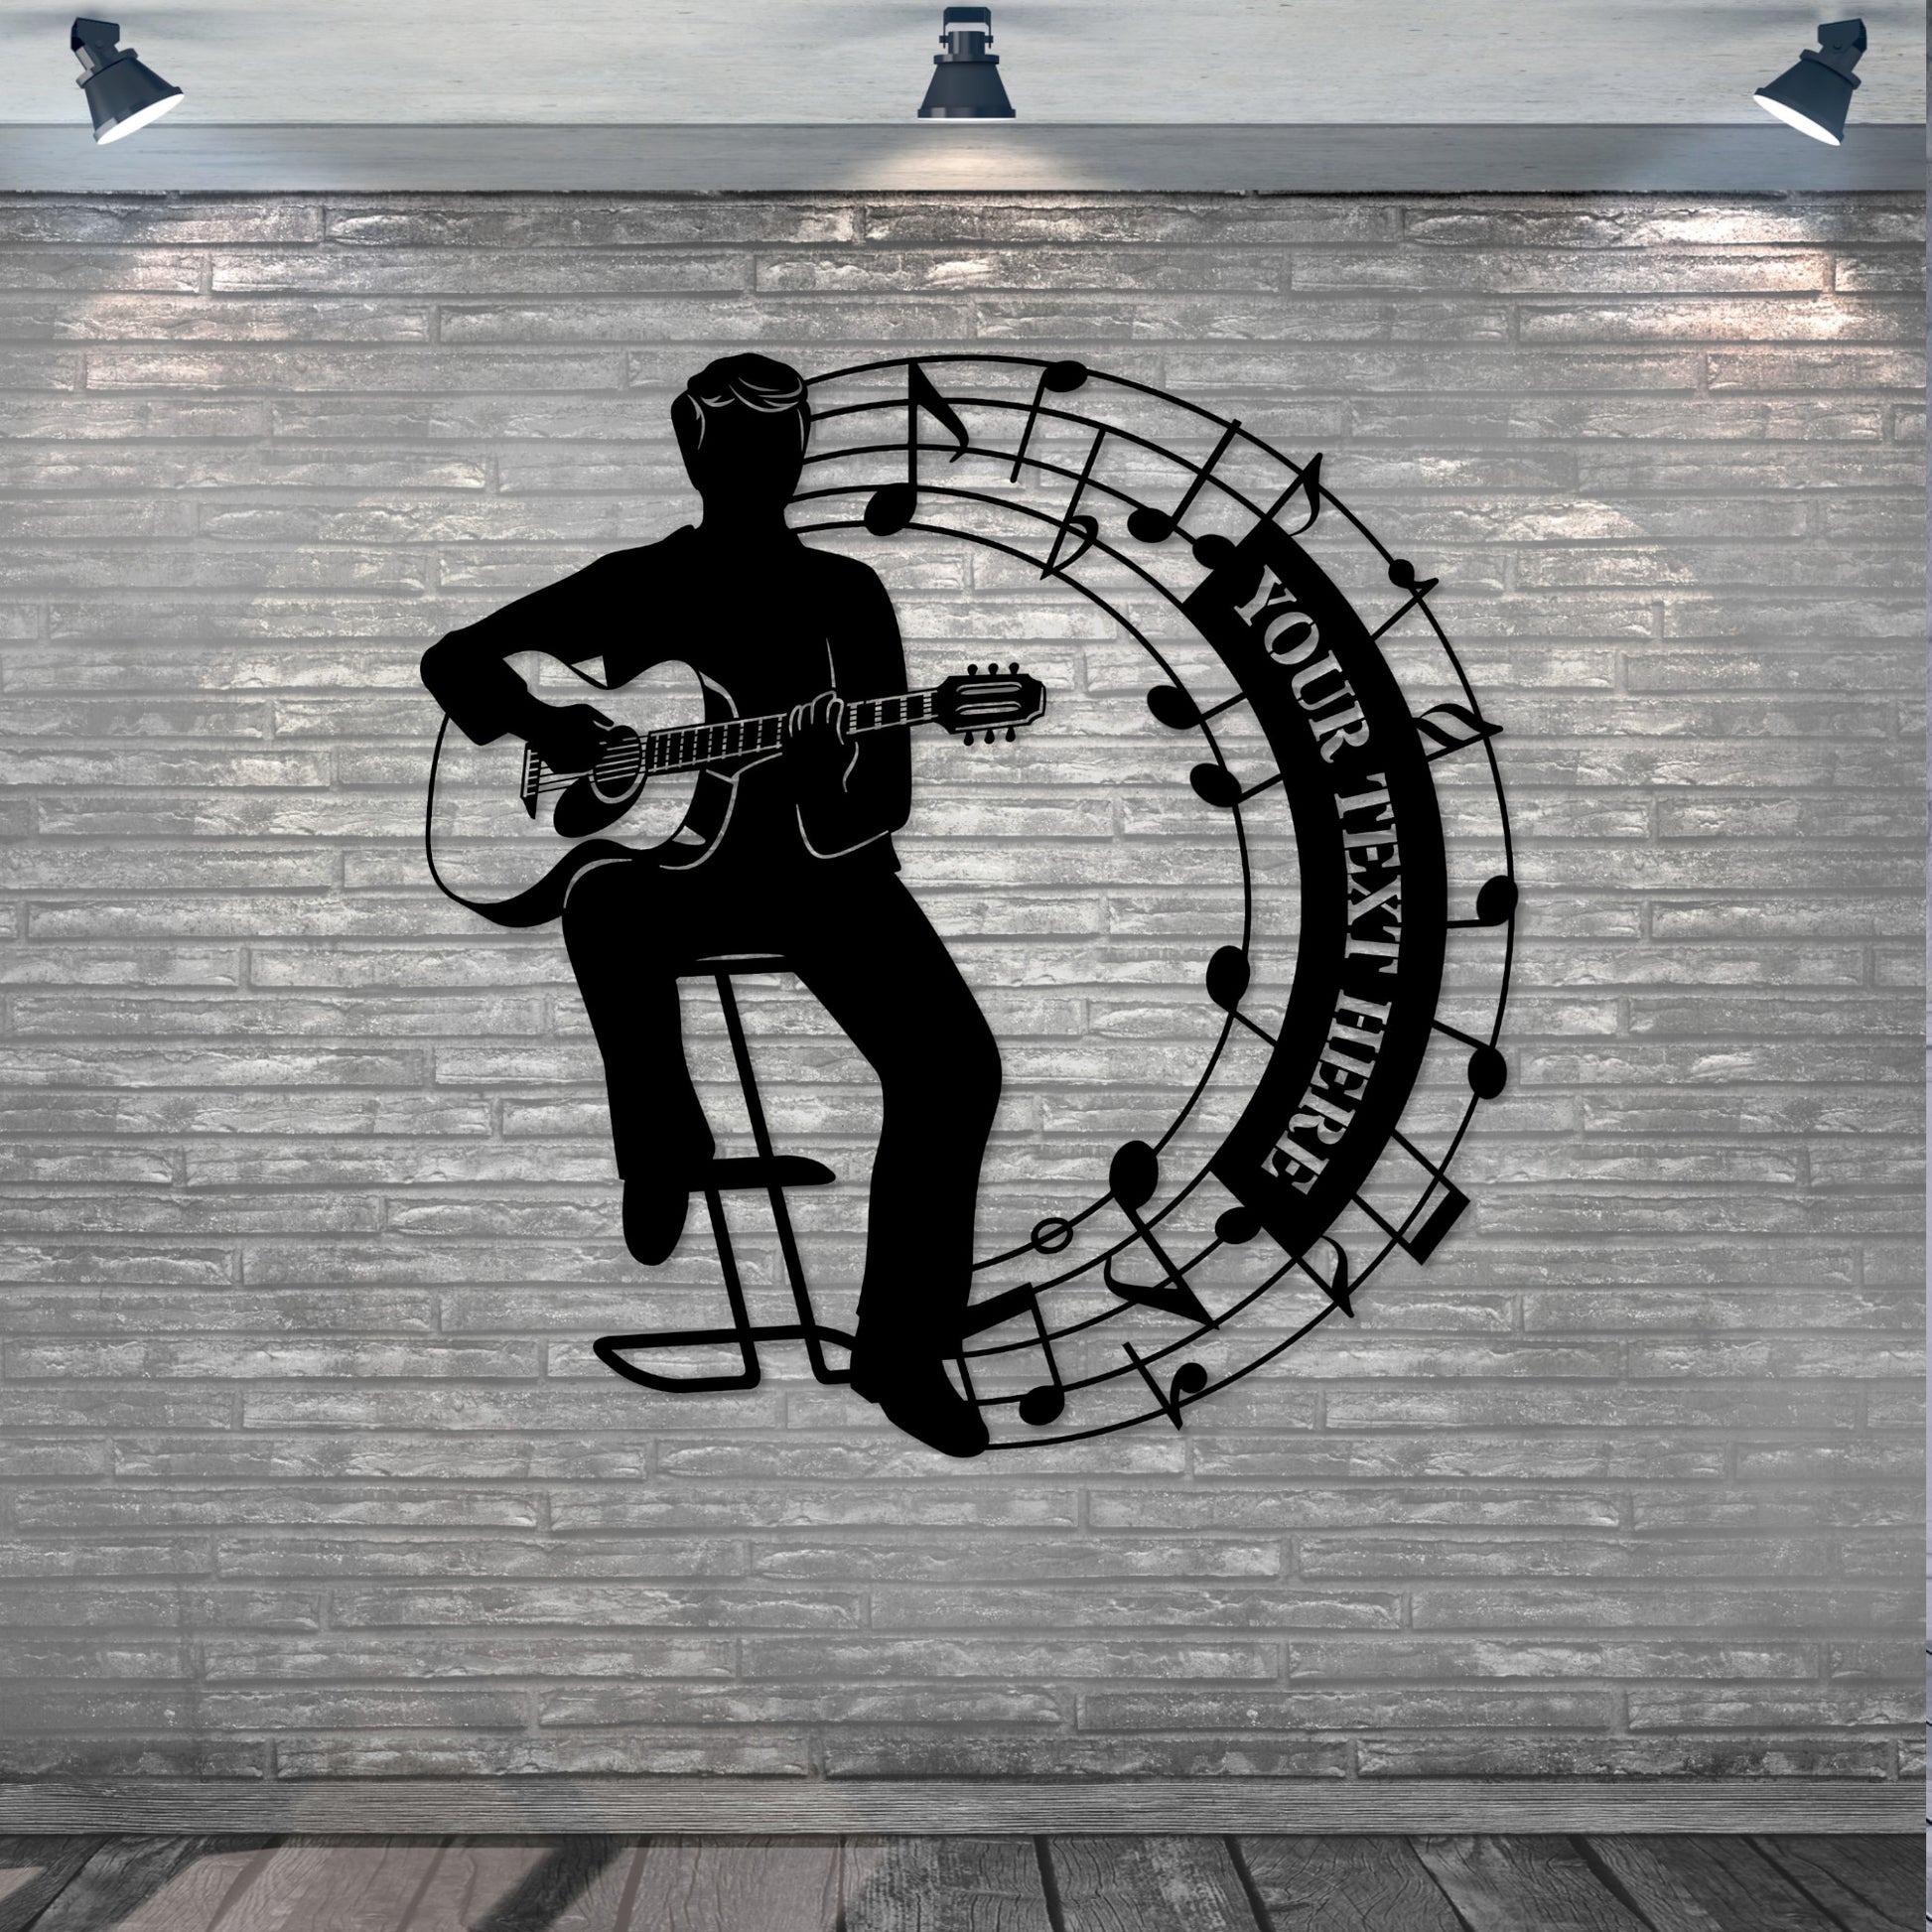 Personalized Male Music Performer Name Metal Sign. Custom Acoustic Guitarist Wall Decor Gift. Musician artist Wall Hanging. Music Room Decor